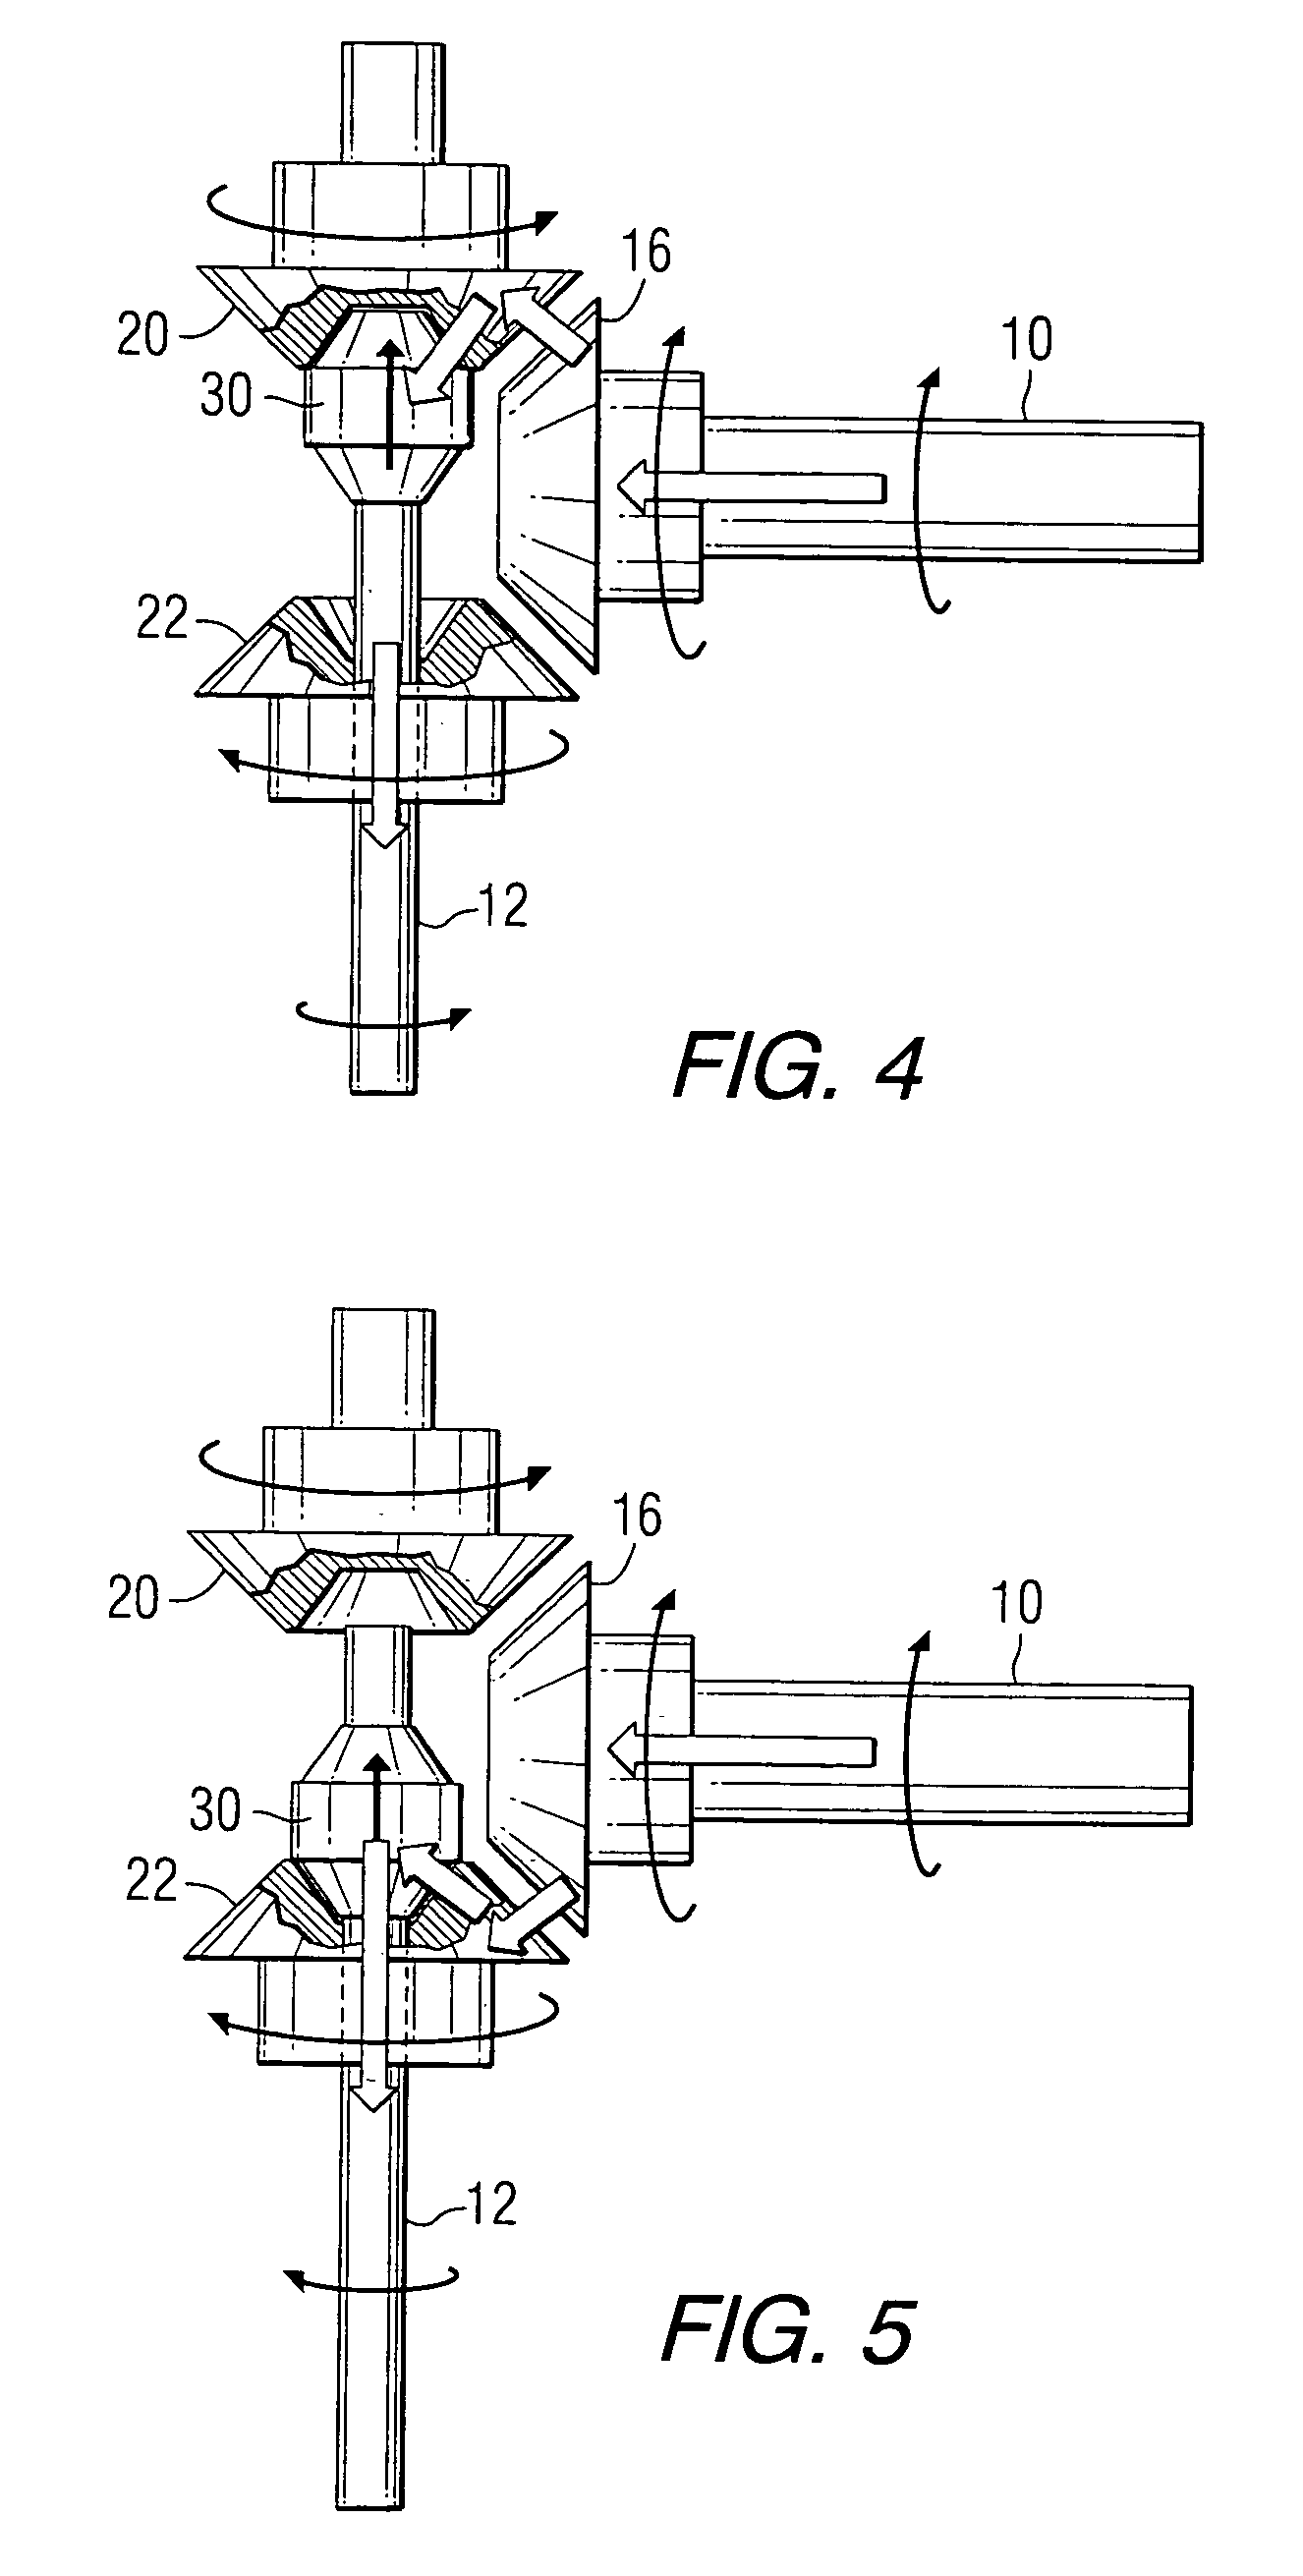 Marine transmission with a cone clutch used for direct transfer of torque